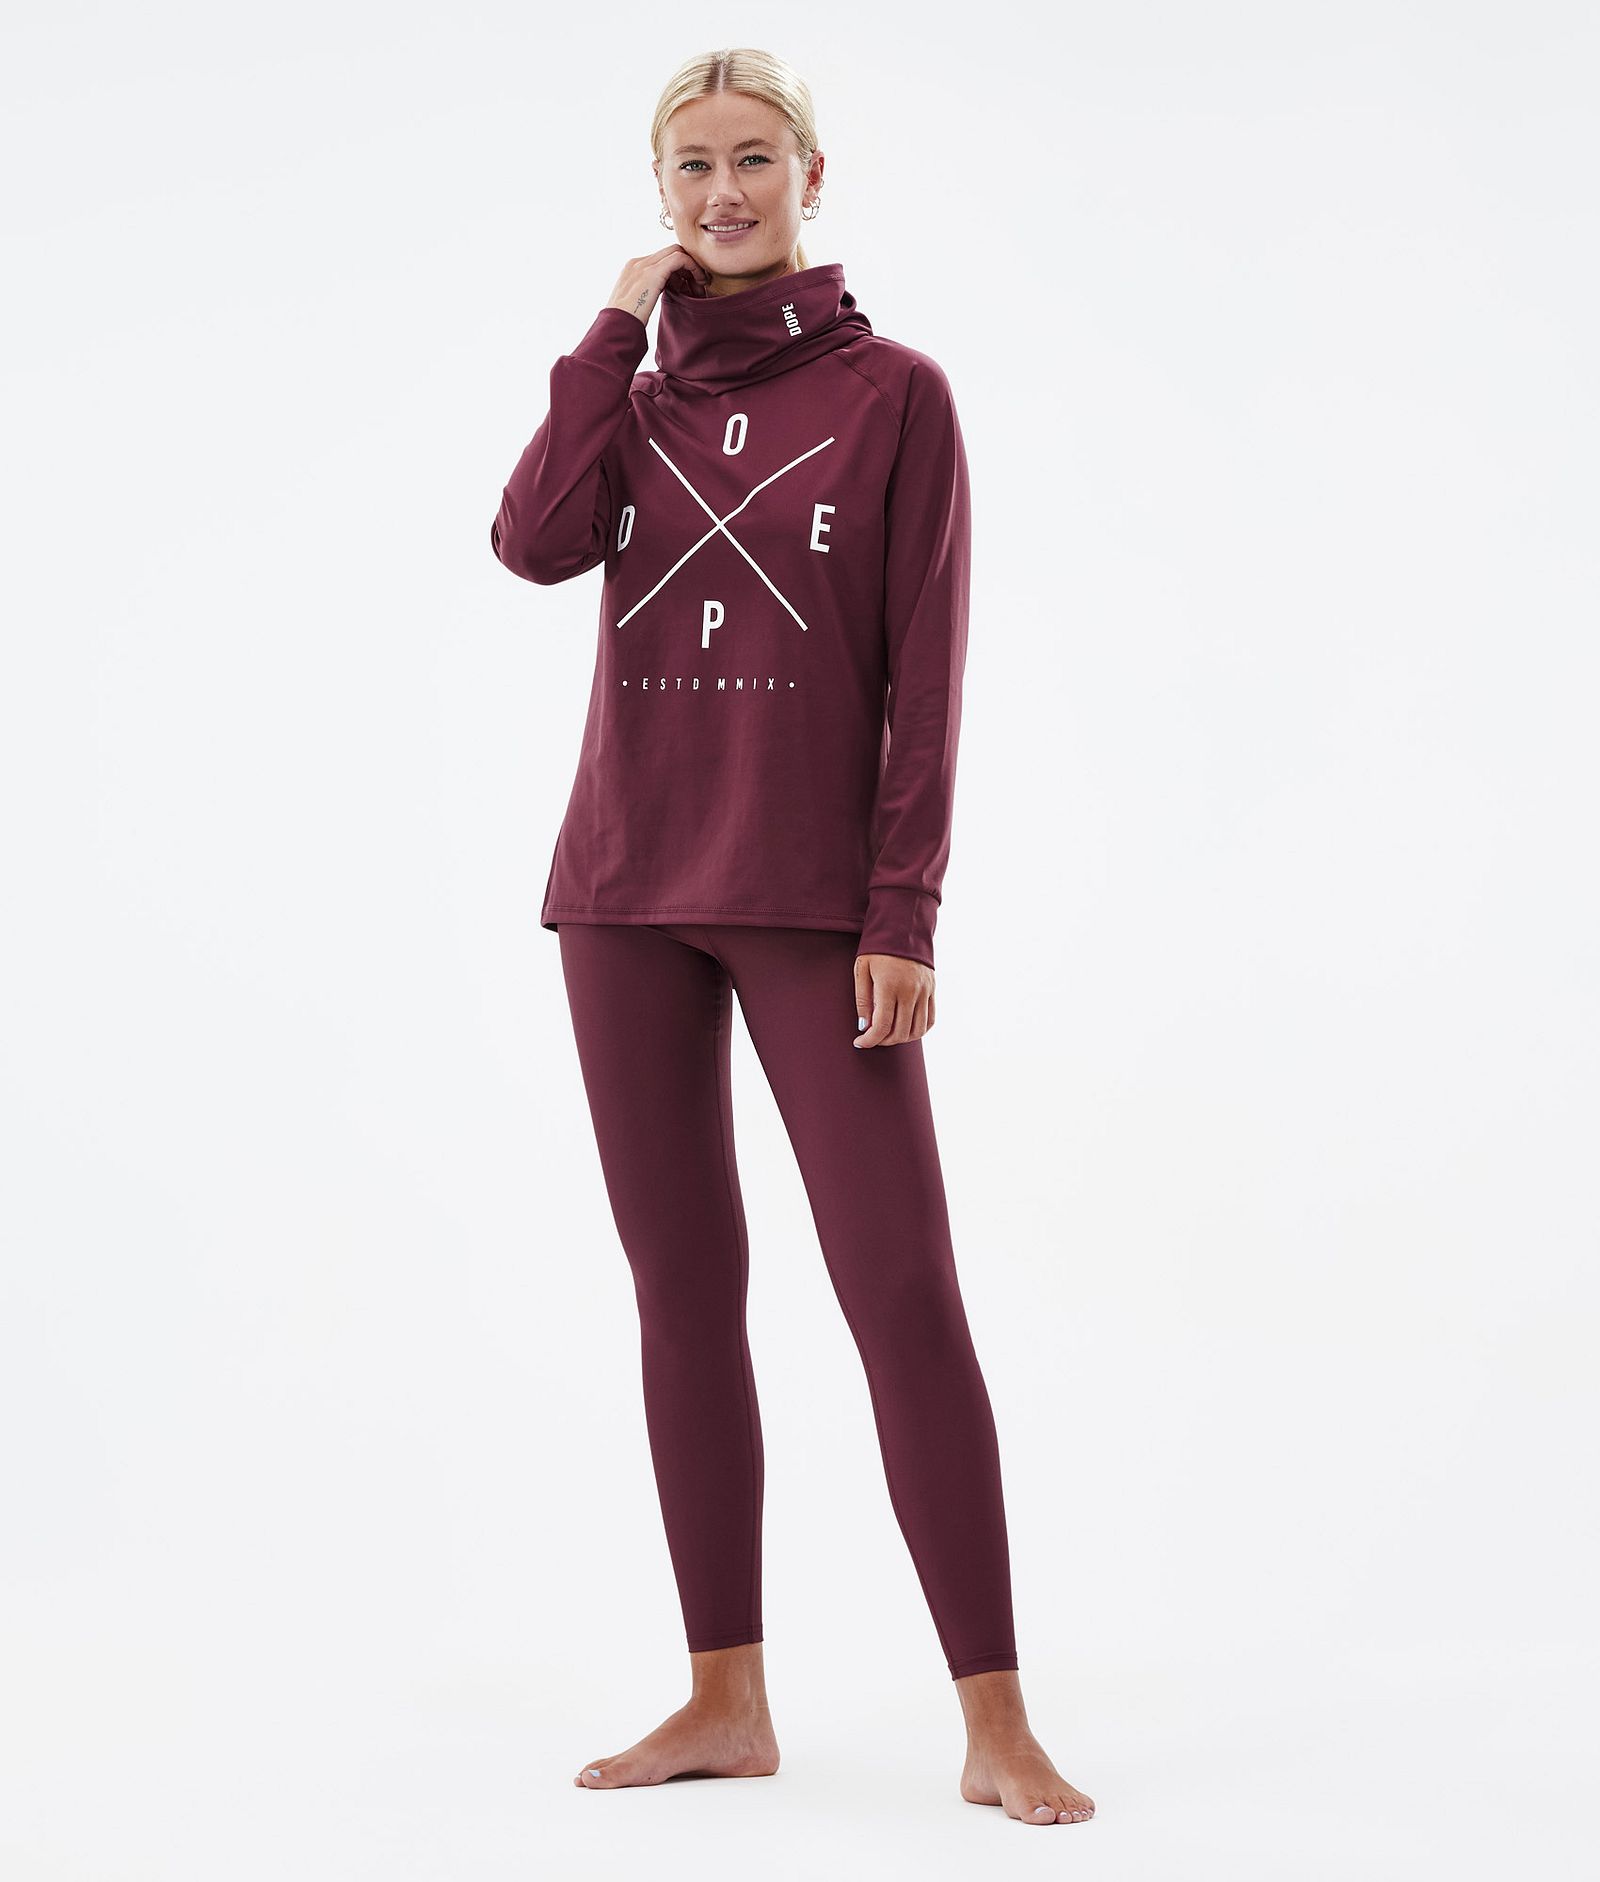 Dope Snuggle W 2022 Tee-shirt thermique Femme 2X-Up Burgundy, Image 4 sur 6